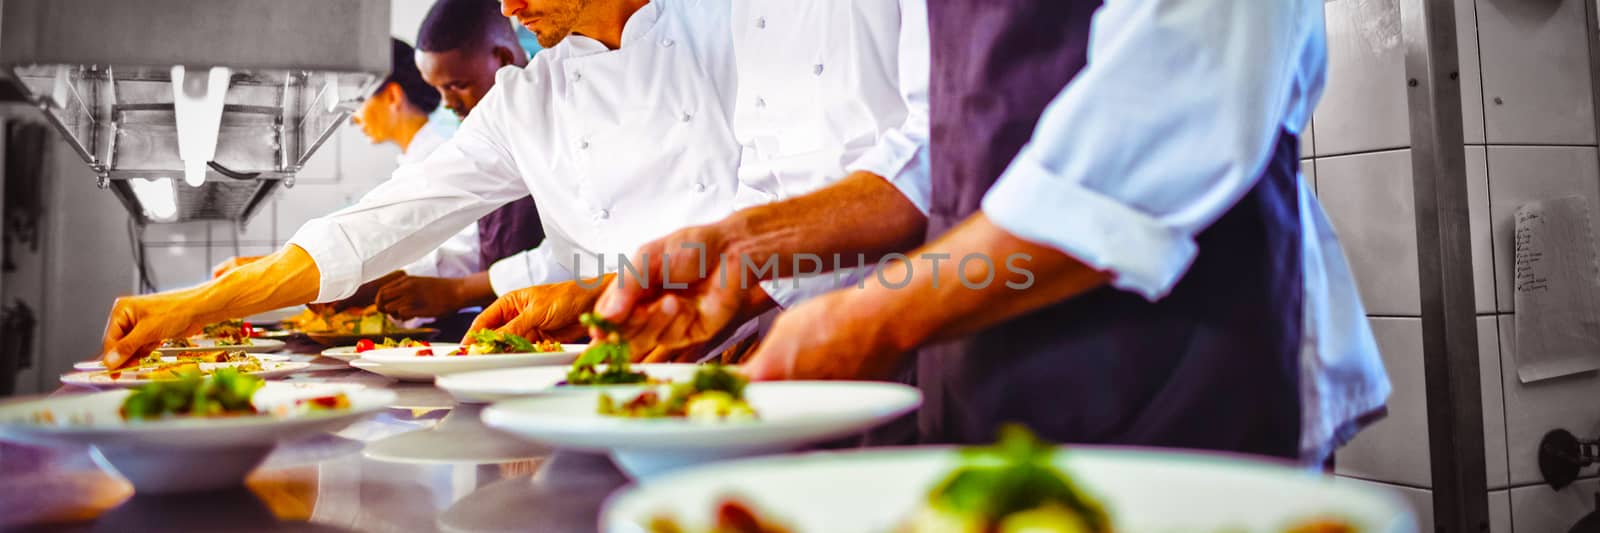 Team of chefs garnishing meal on counter by Wavebreakmedia